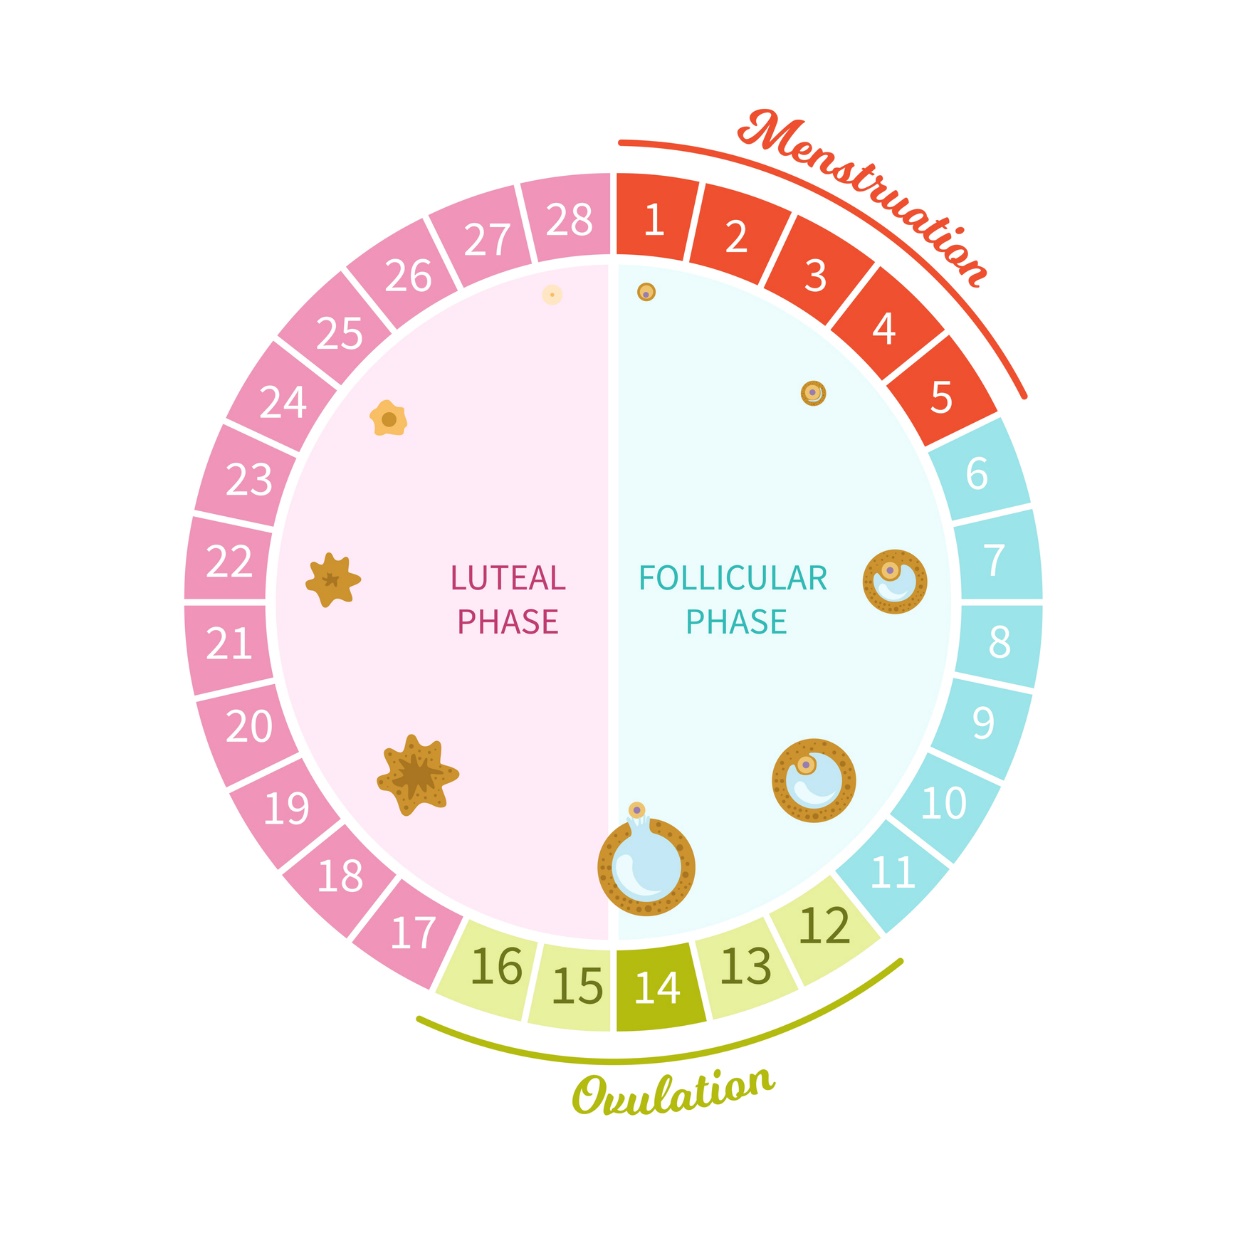 The different phases of a woman's menstrual cycle shown in 28 days